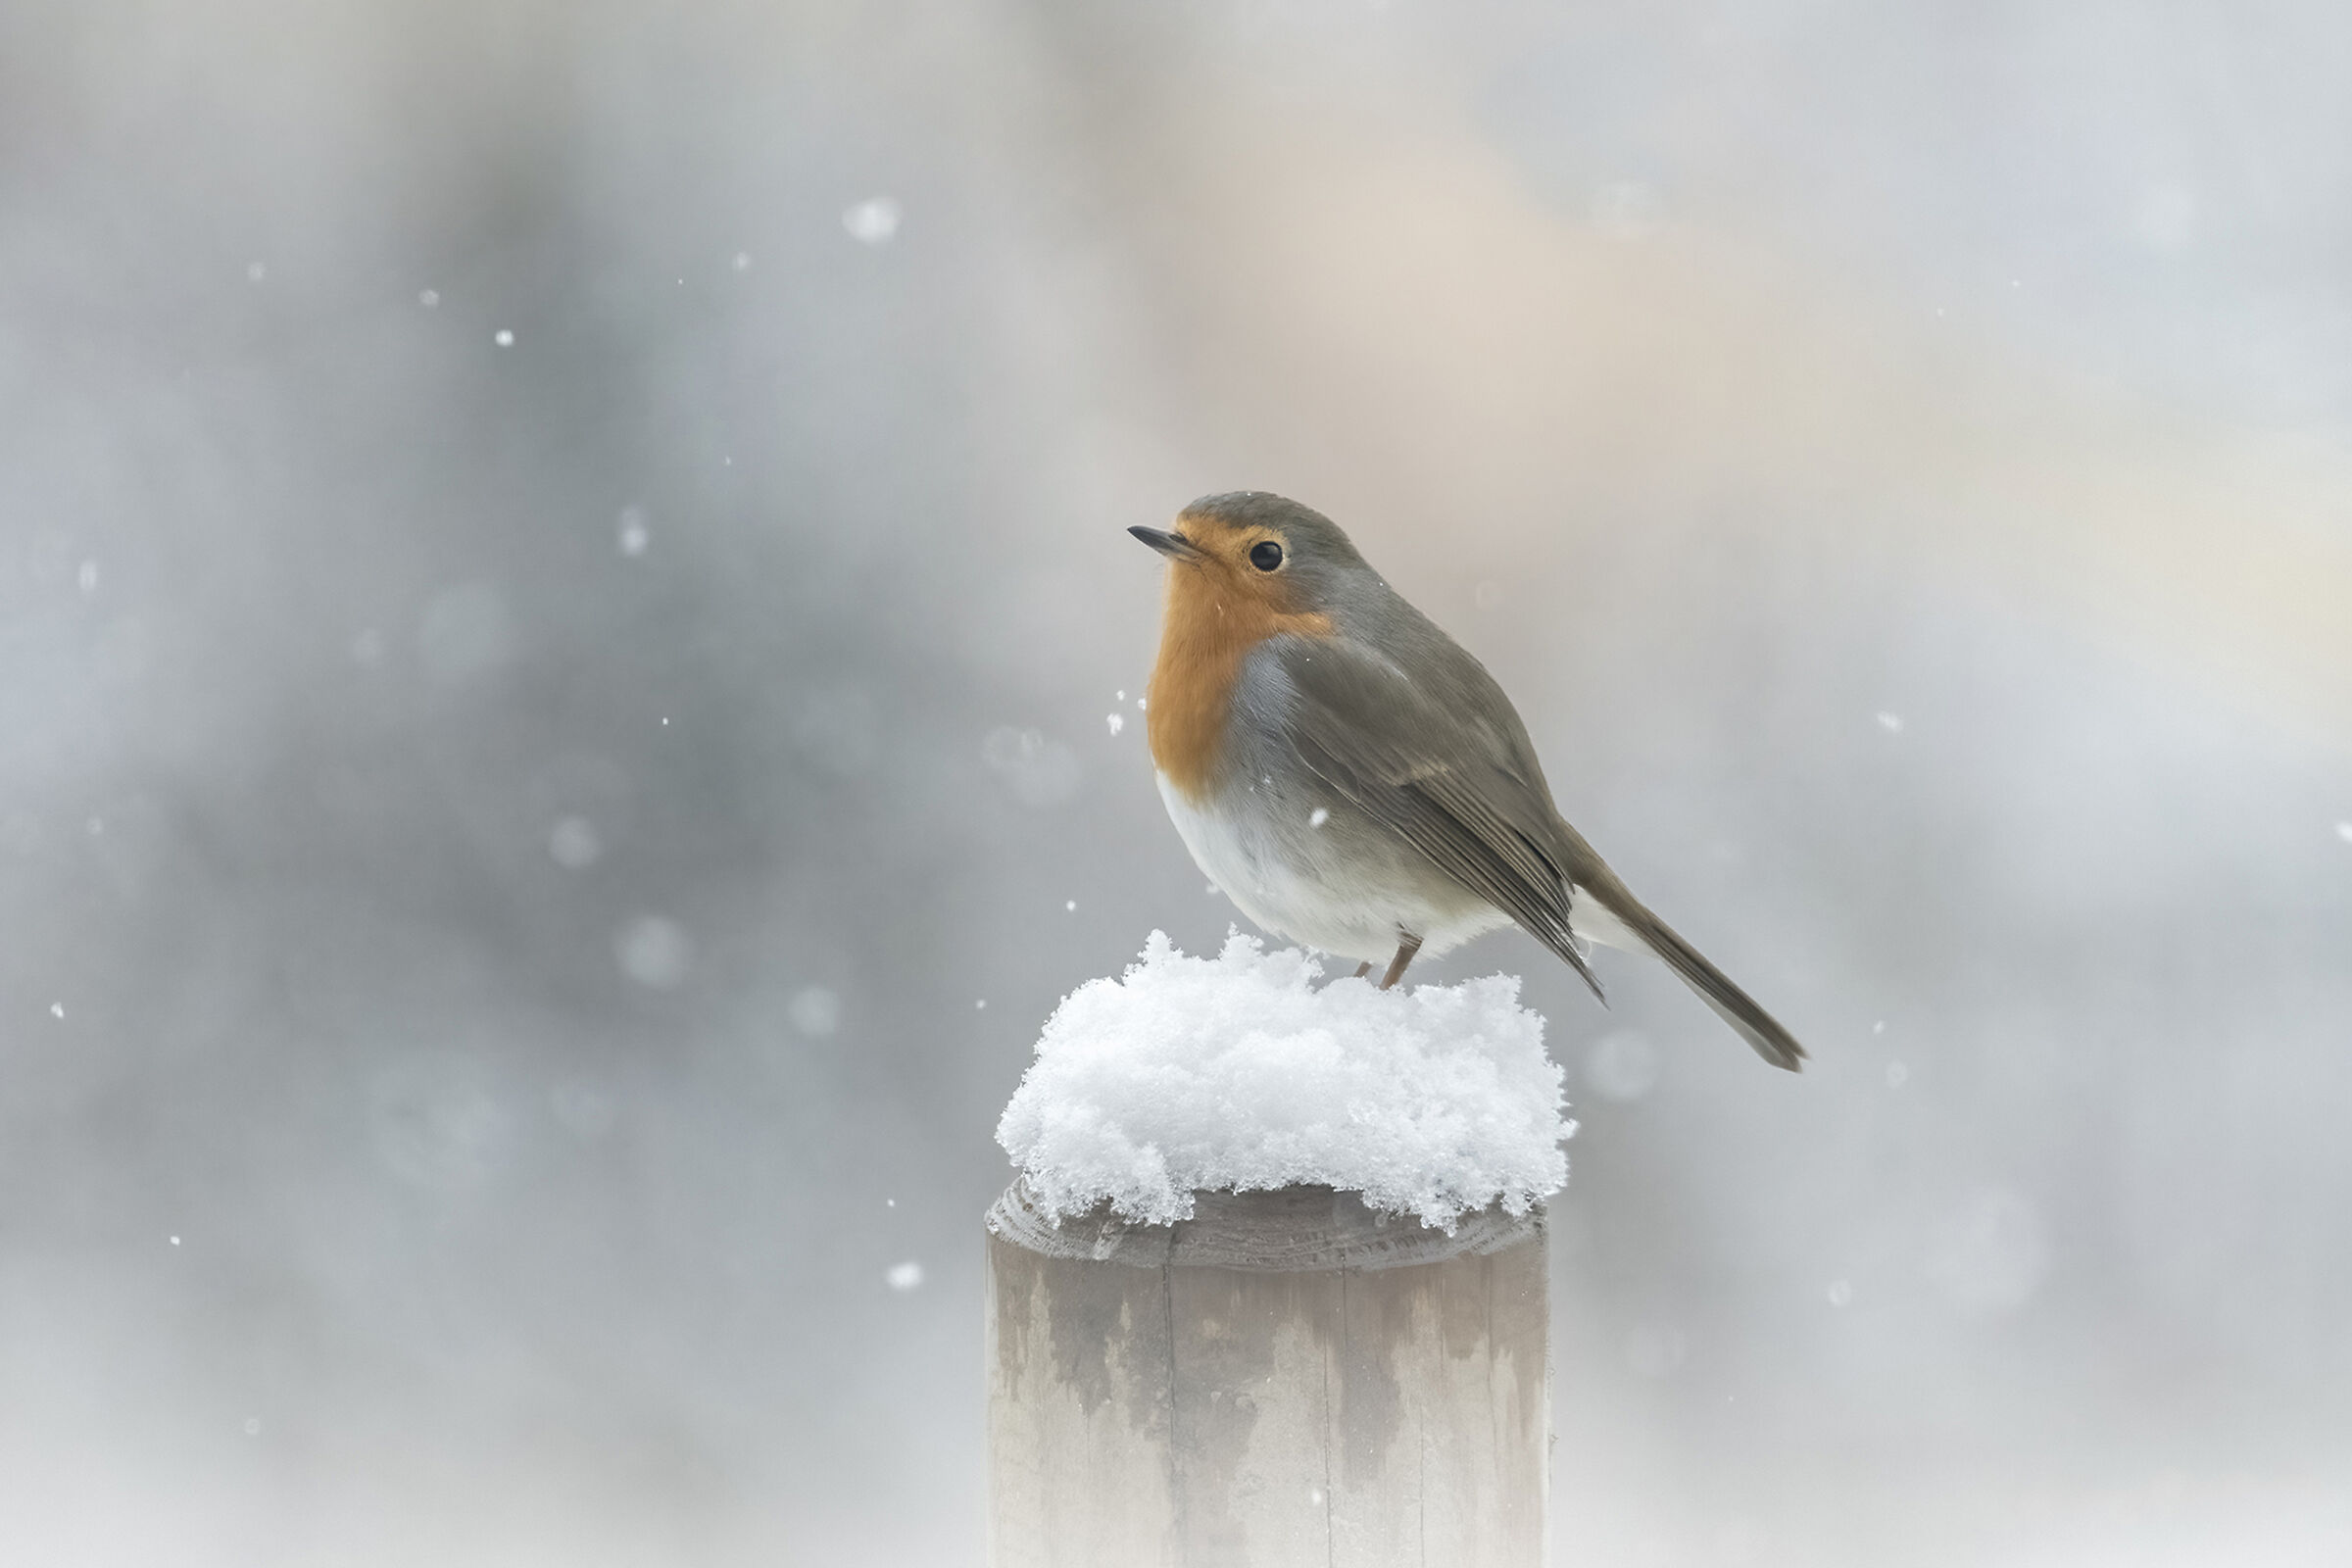 The loneliness of the robin...